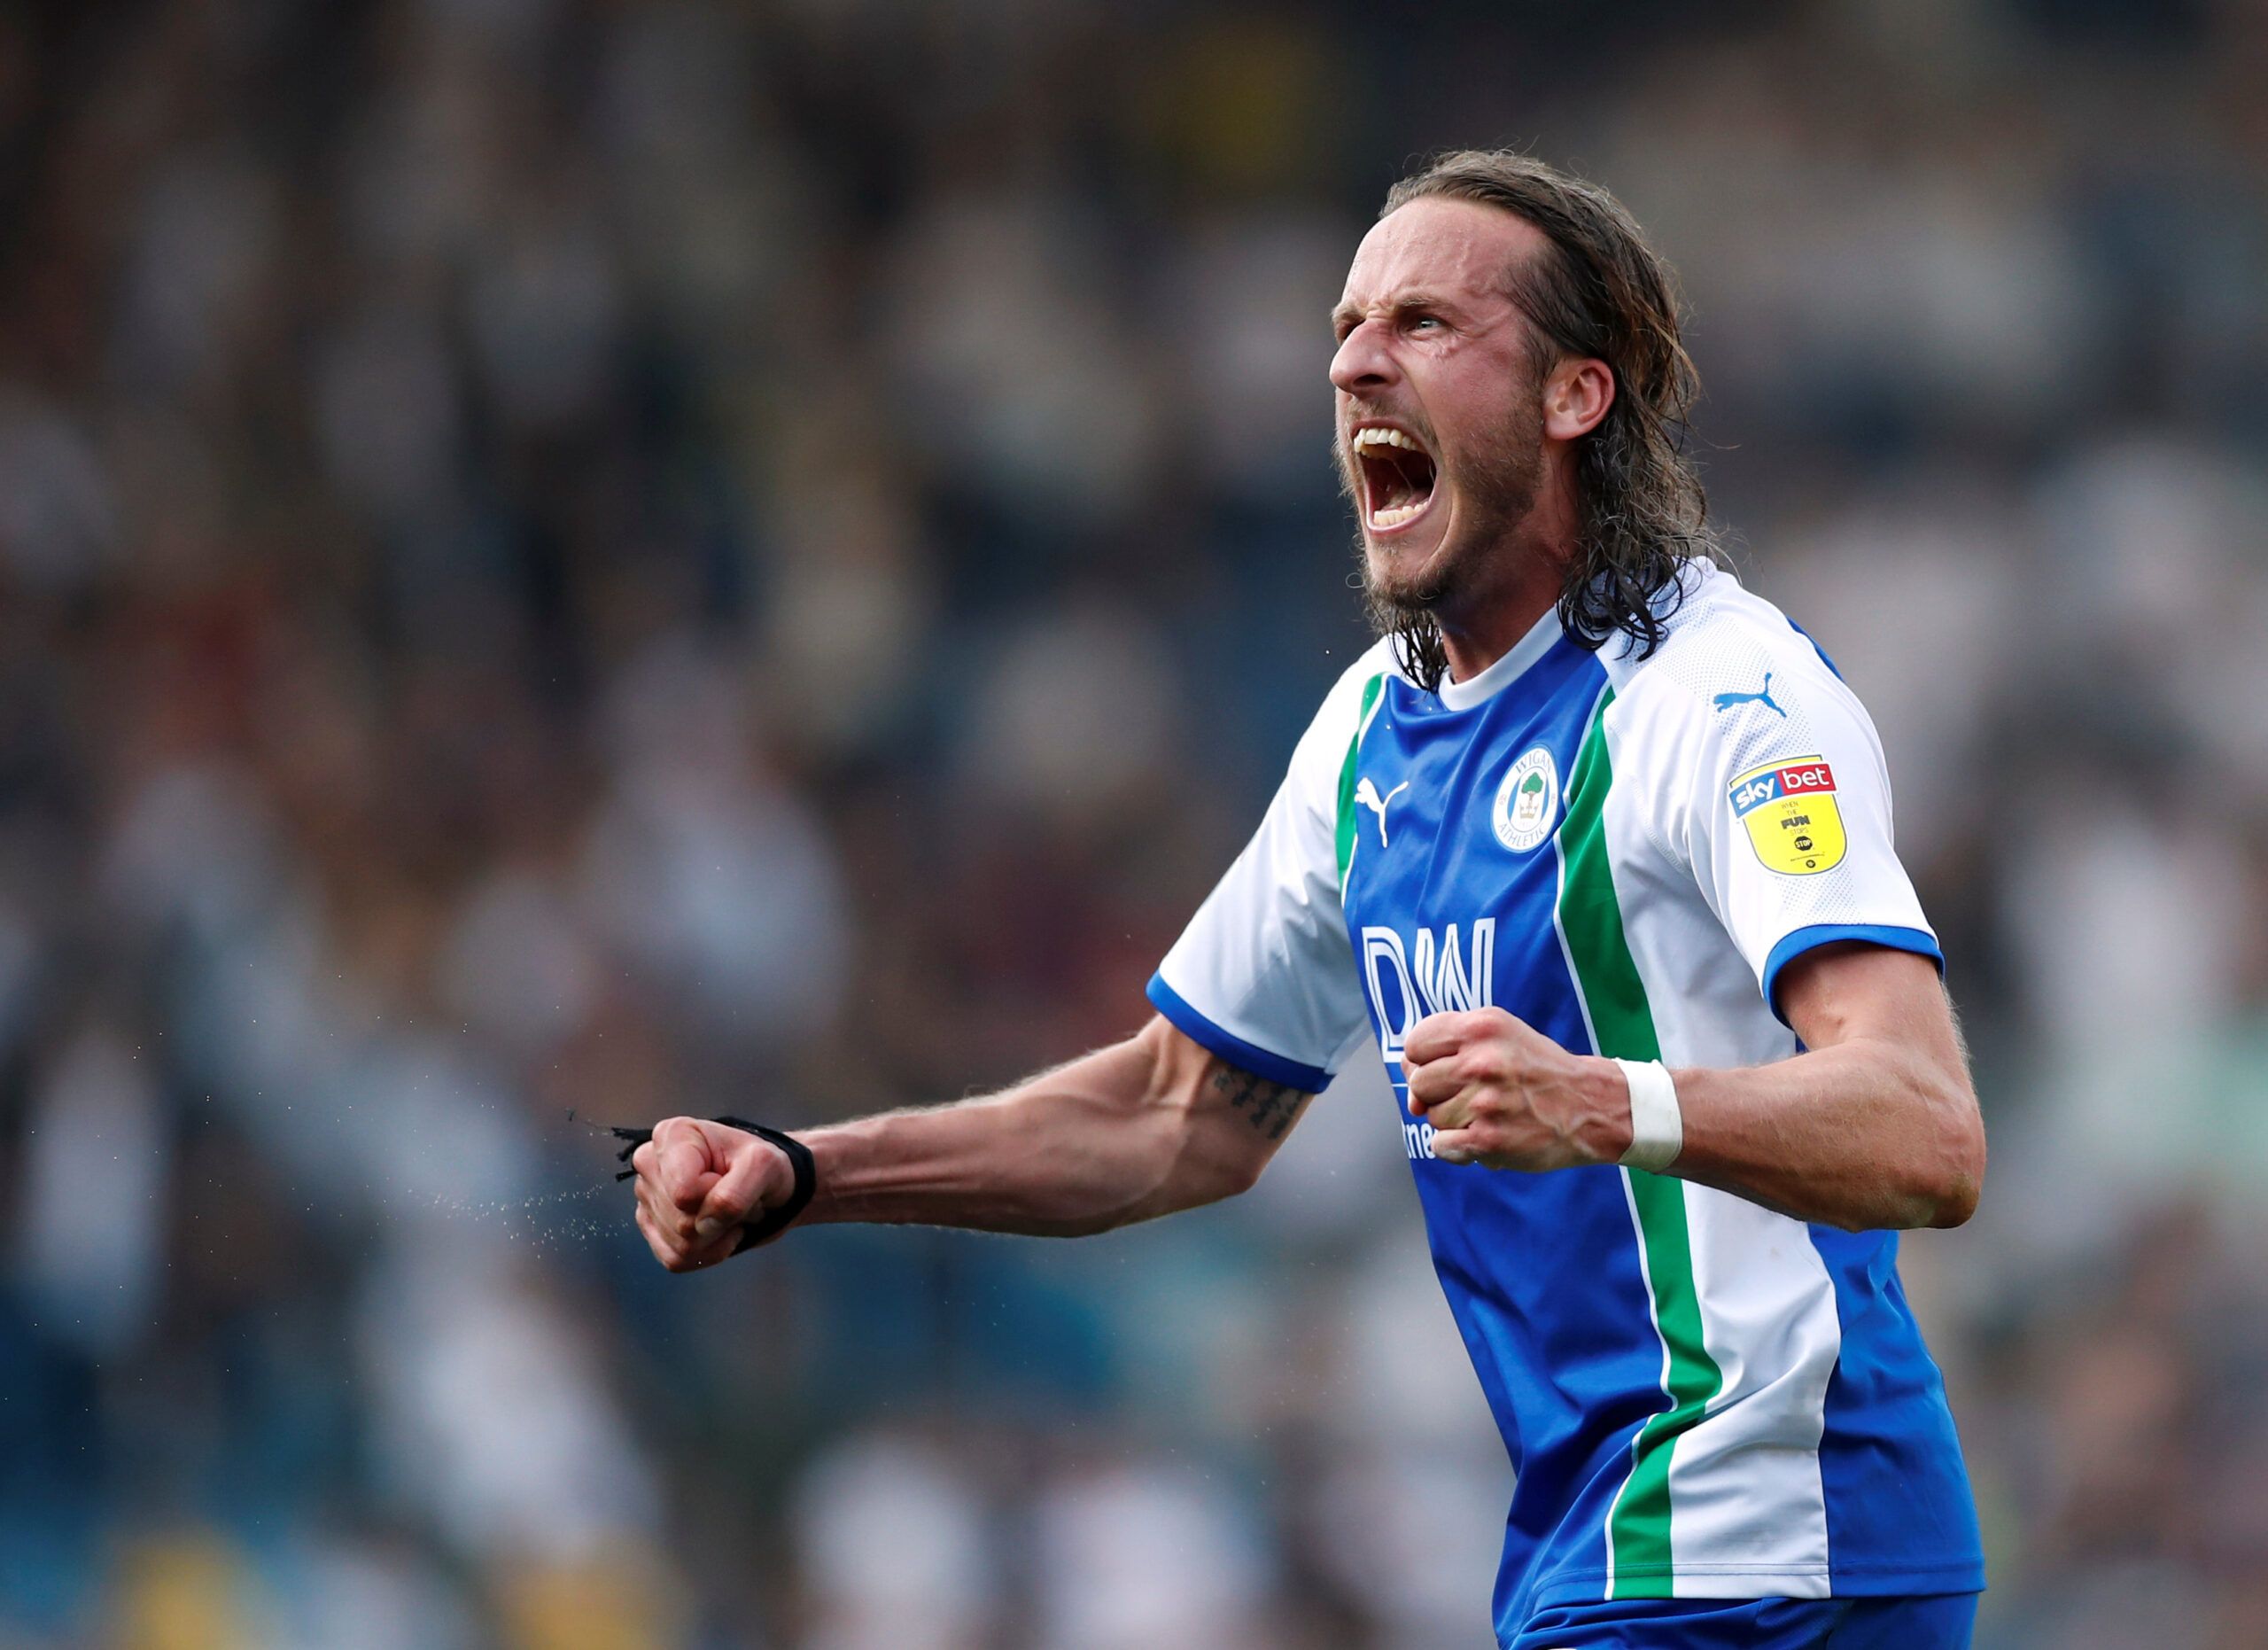 Soccer Football - Championship - Leeds United v Wigan Athletic - Elland Road, Leeds, Britain - April 19, 2019   Wigan's Jonas Olsson celebrates after the match   Action Images/Andrew Boyers    EDITORIAL USE ONLY. No use with unauthorized audio, video, data, fixture lists, club/league logos or 